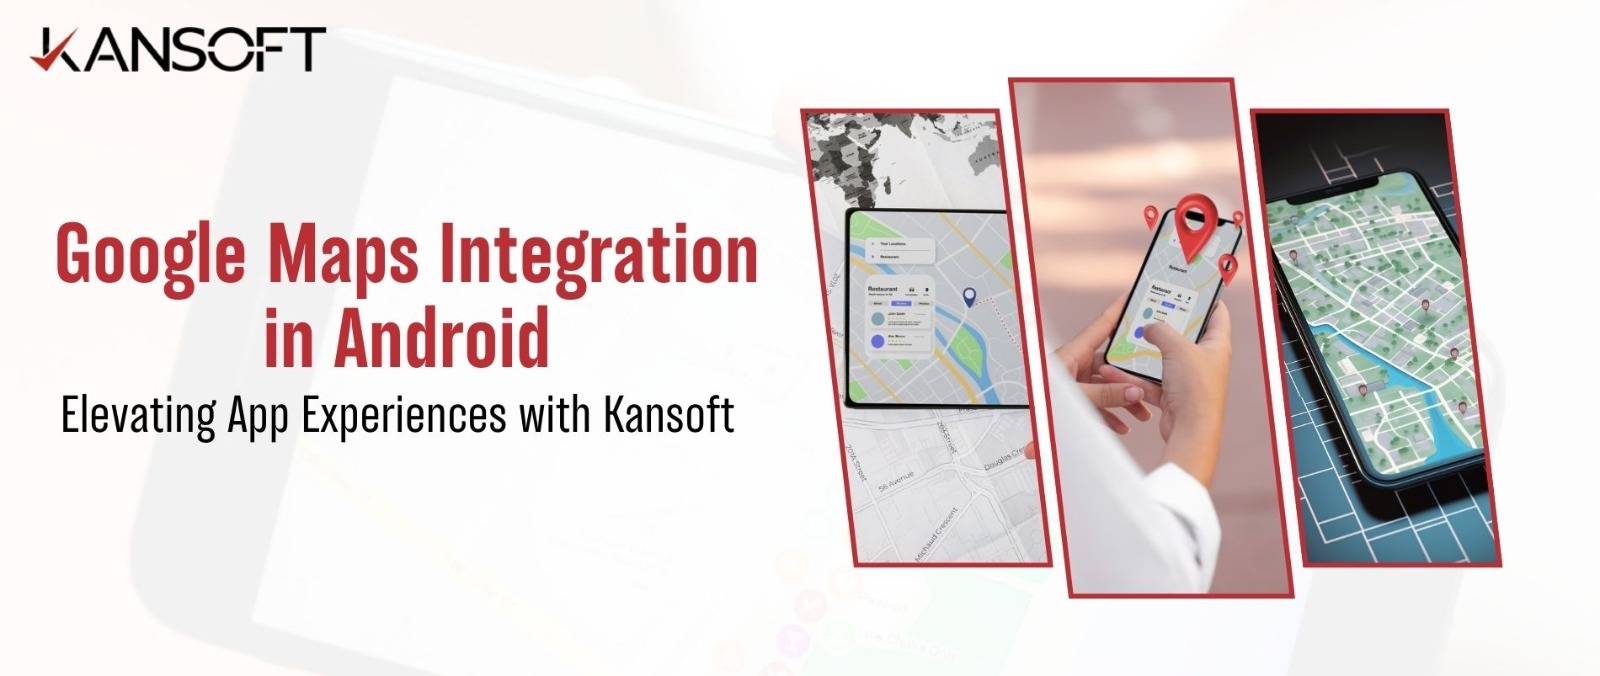 Google Maps Integration in Android: Elevating App Experiences with Kansoft